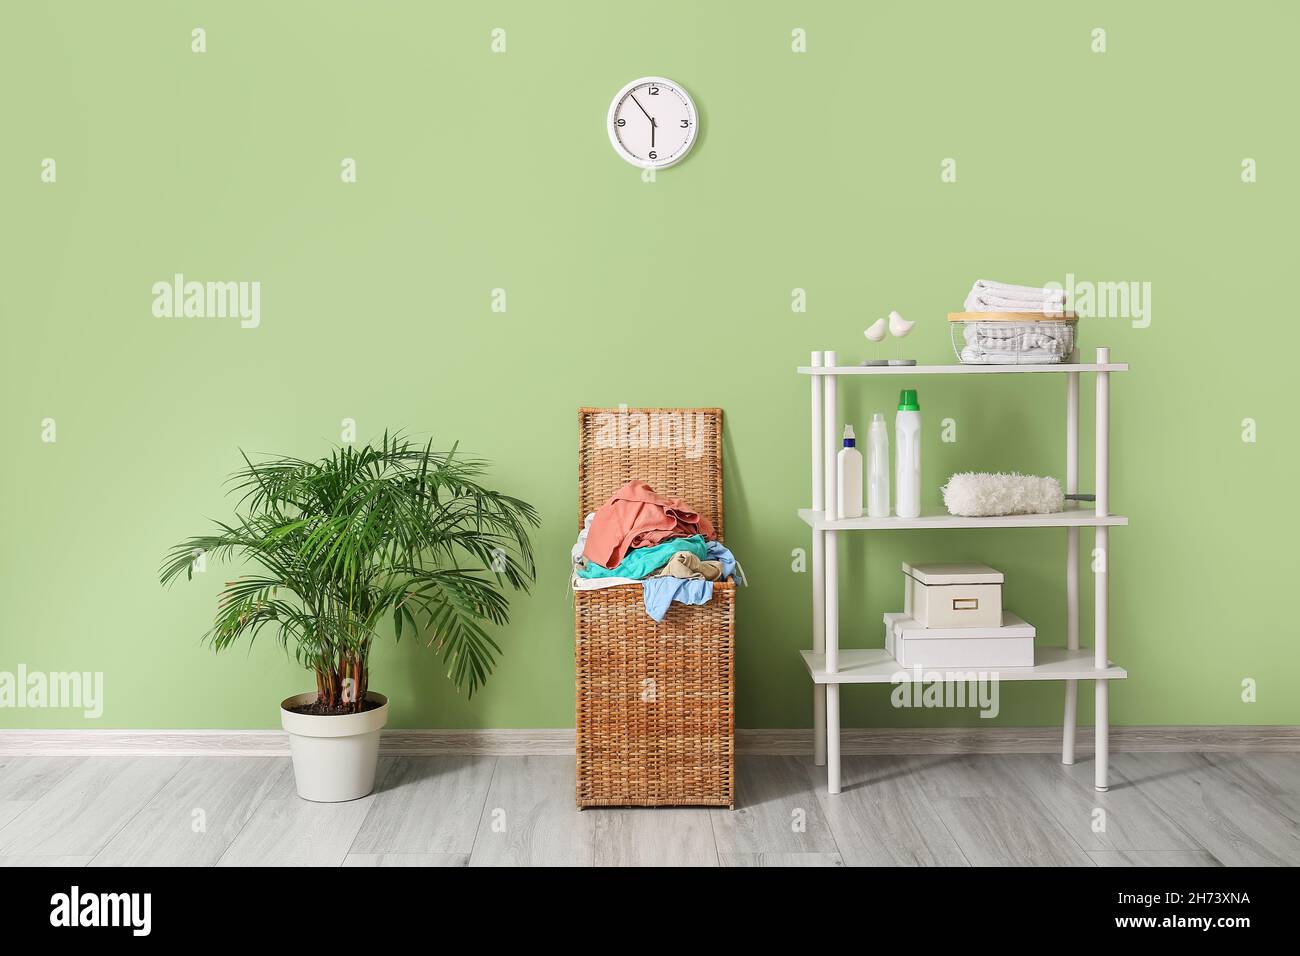 Wicker basket with laundry, shelving unit and houseplant near green wall Stock Photo